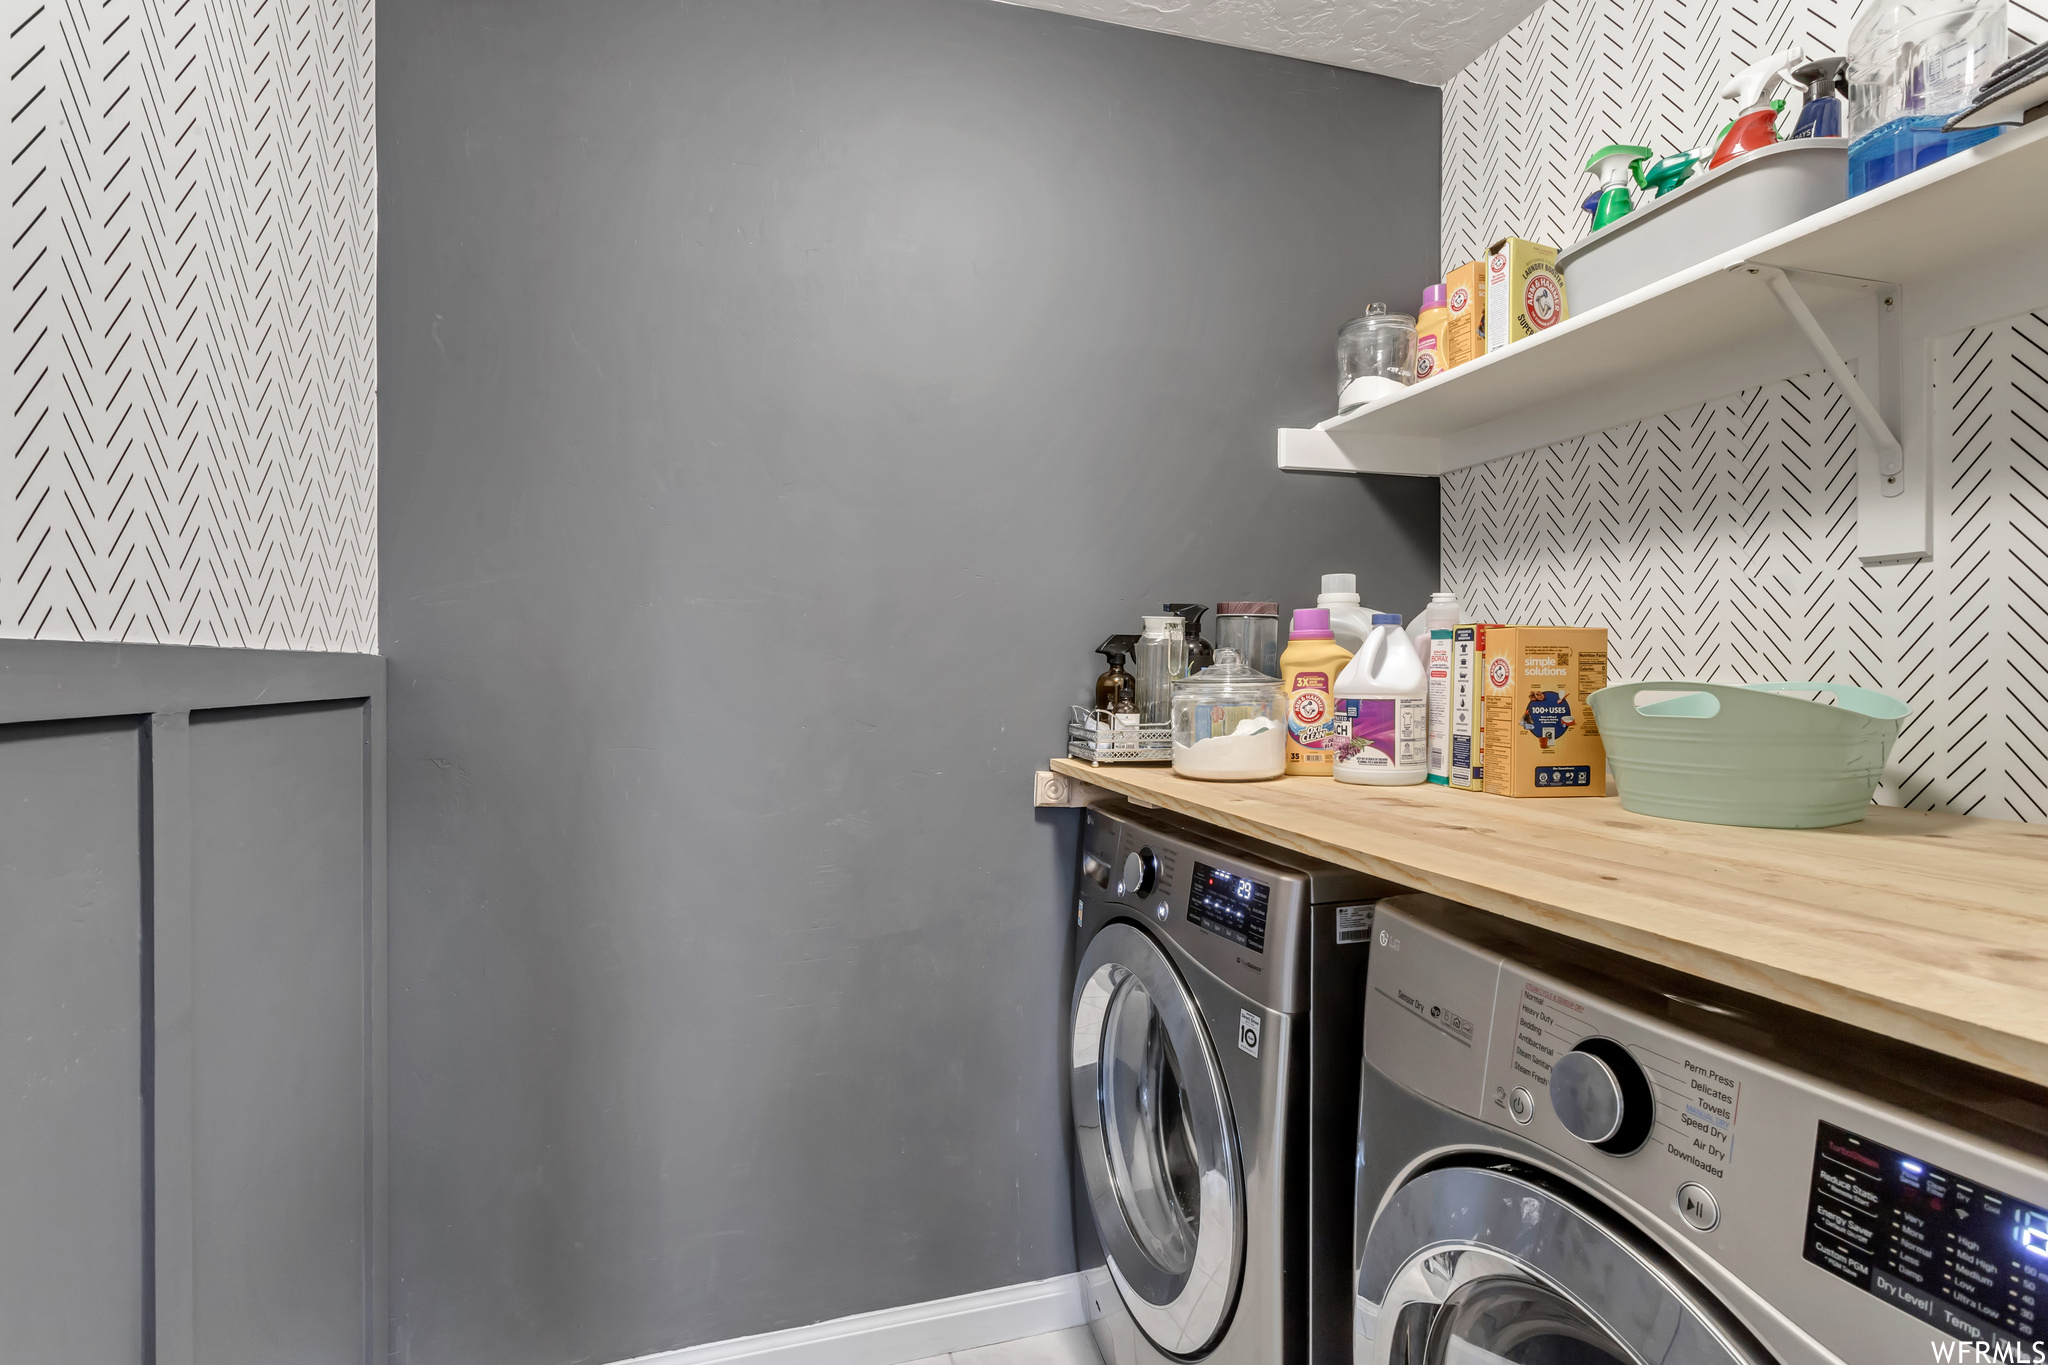 Clothes washing area featuring washing machine and dryer and a textured ceiling